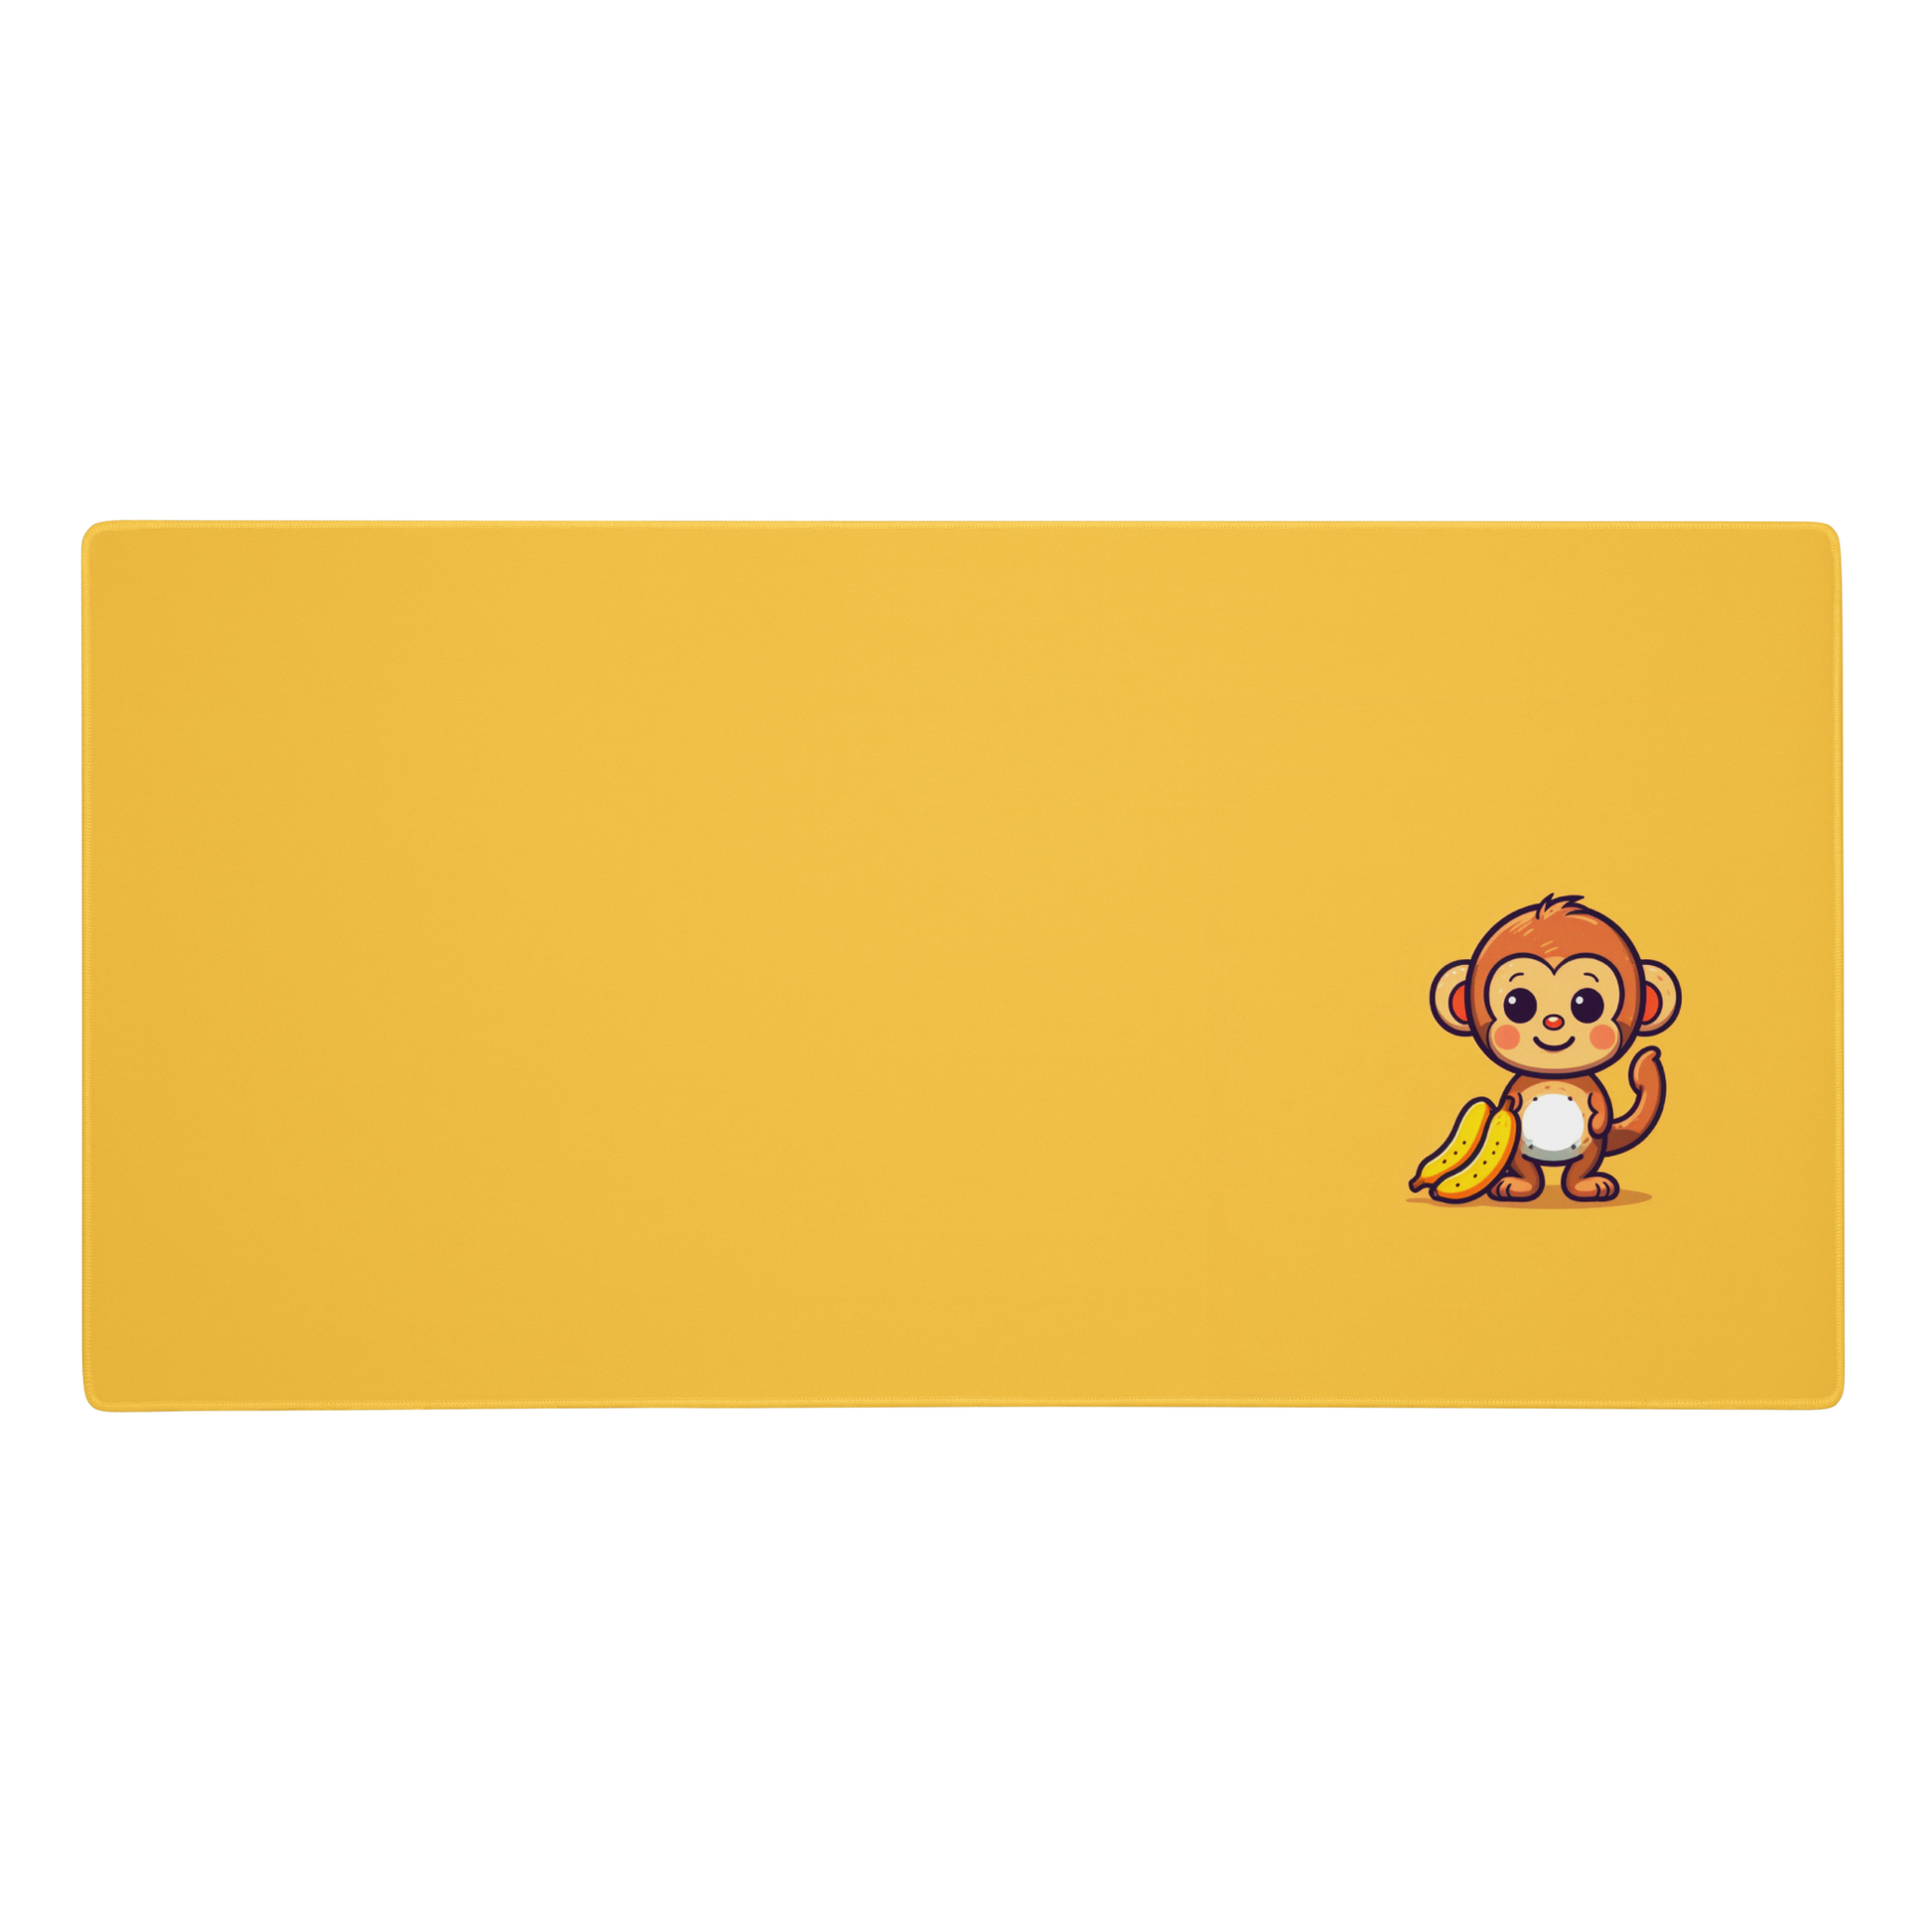 A 36" x 18" desk pad with a cute monkey holding bananas. Yellow in color.